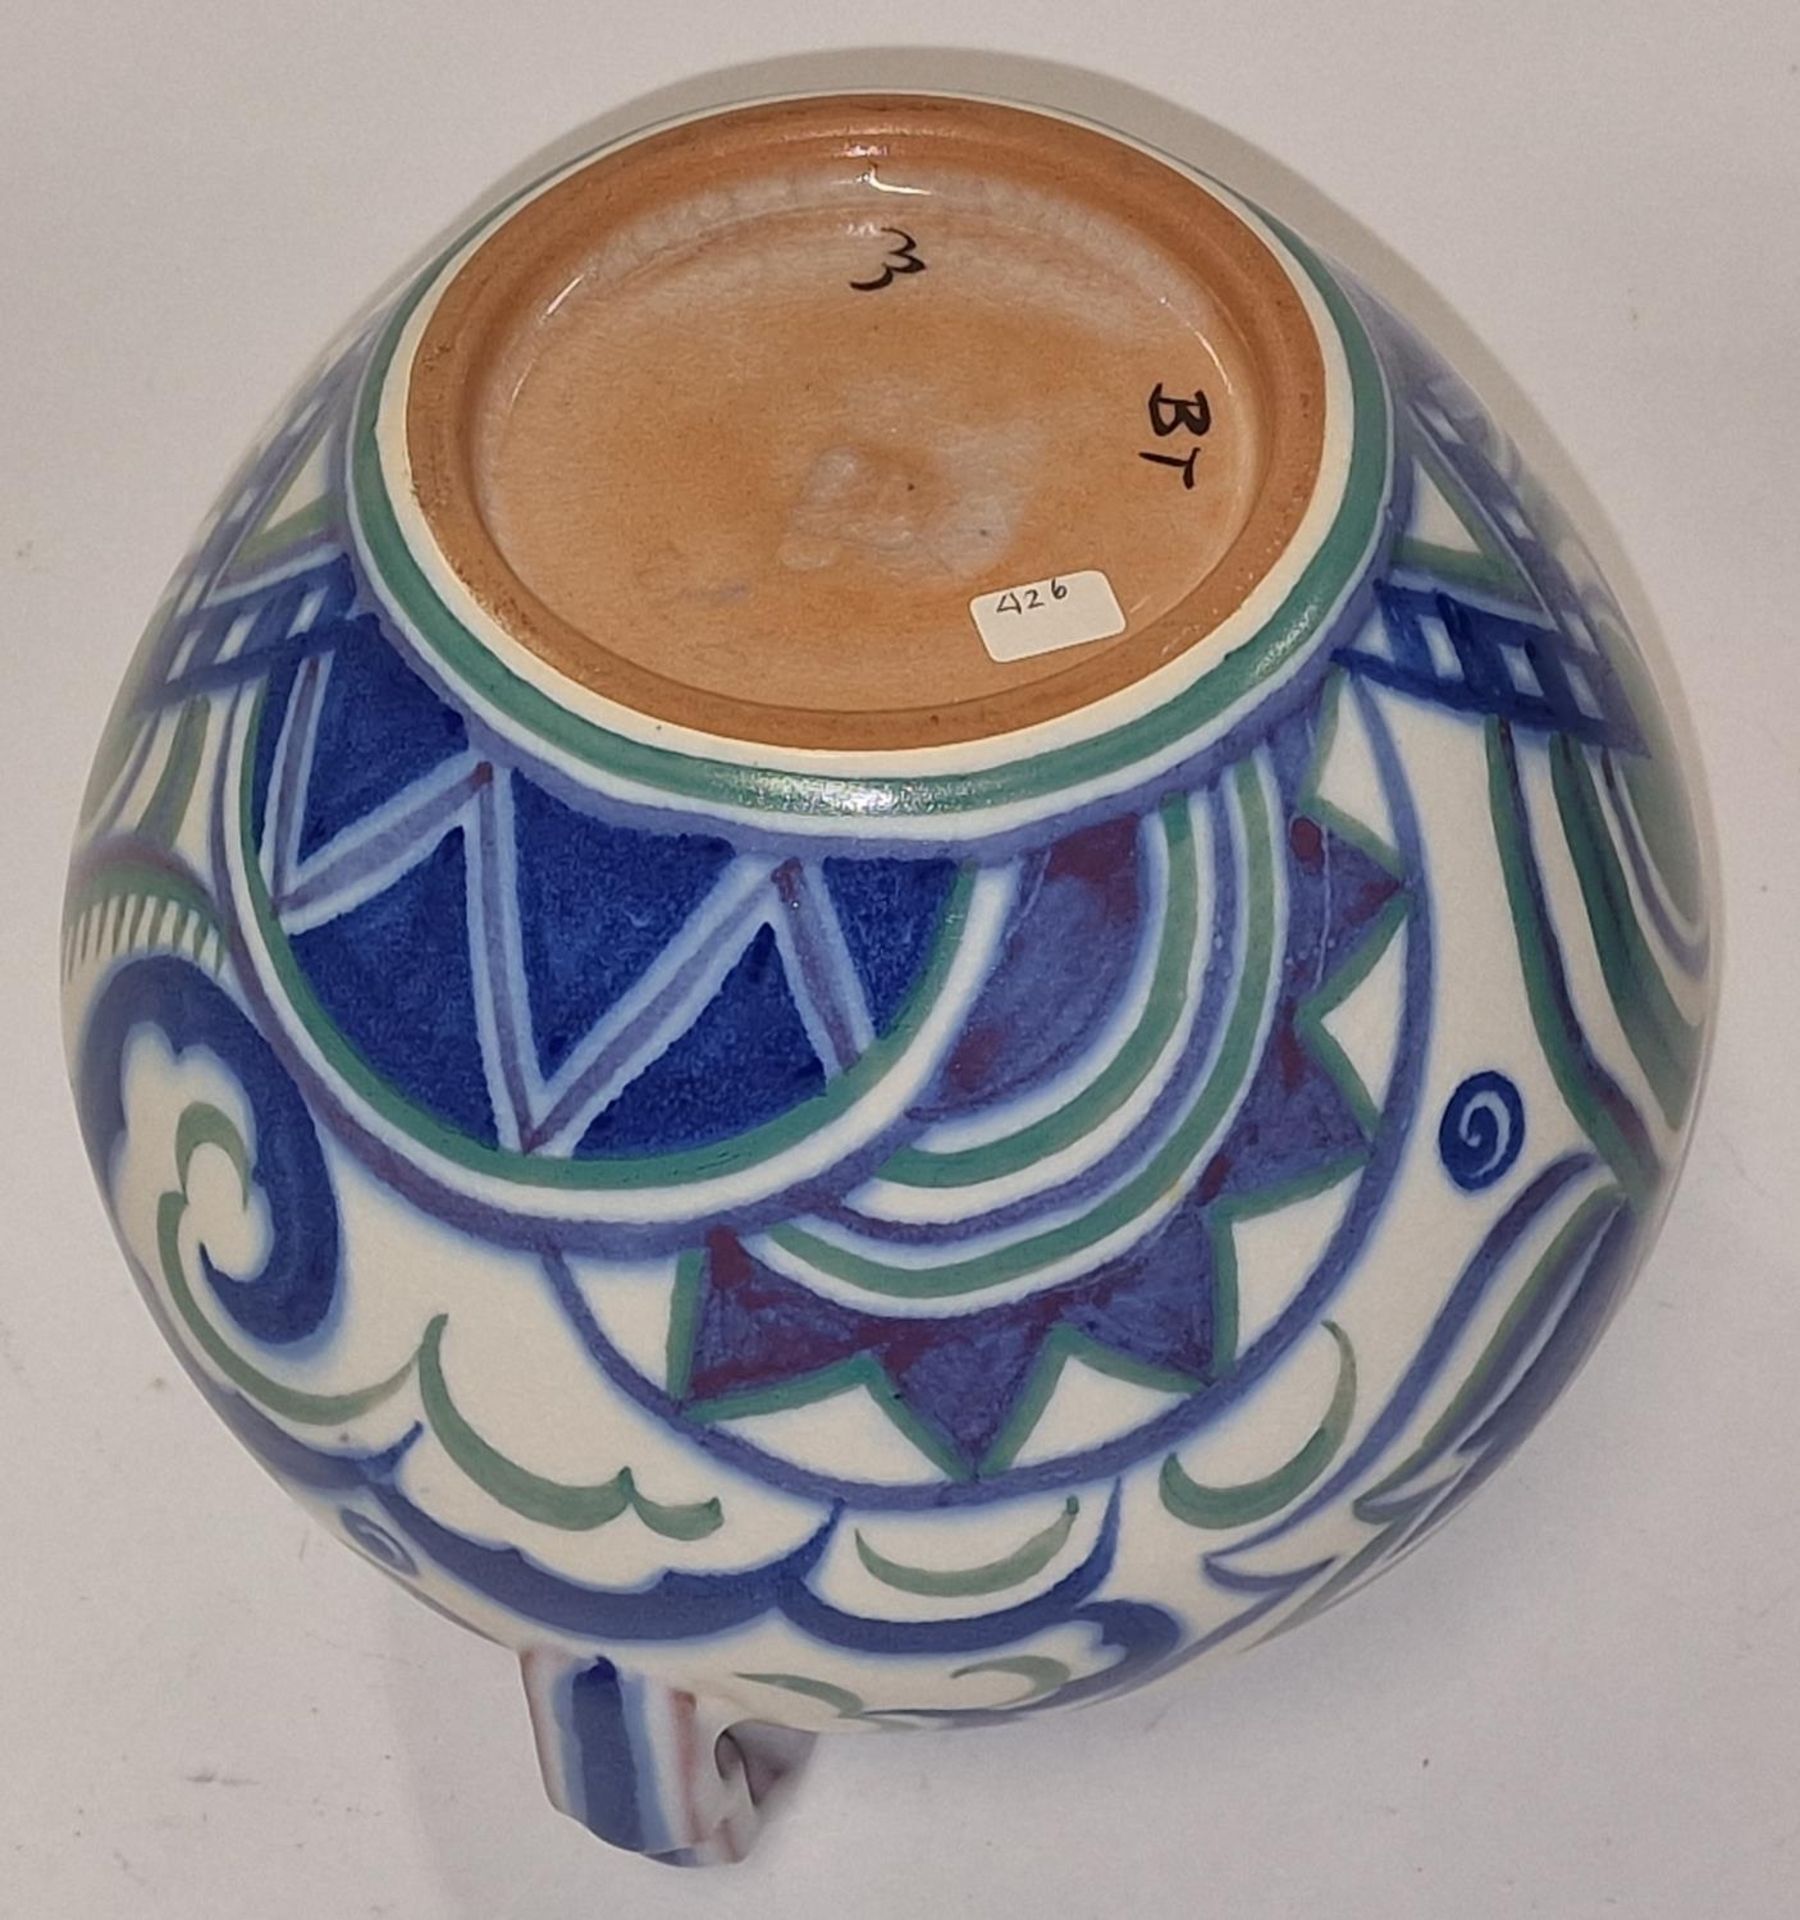 Poole Pottery Carter Stabler Adams shape 973 BT pattern twin step-handled vase decorated by Mary - Image 3 of 3